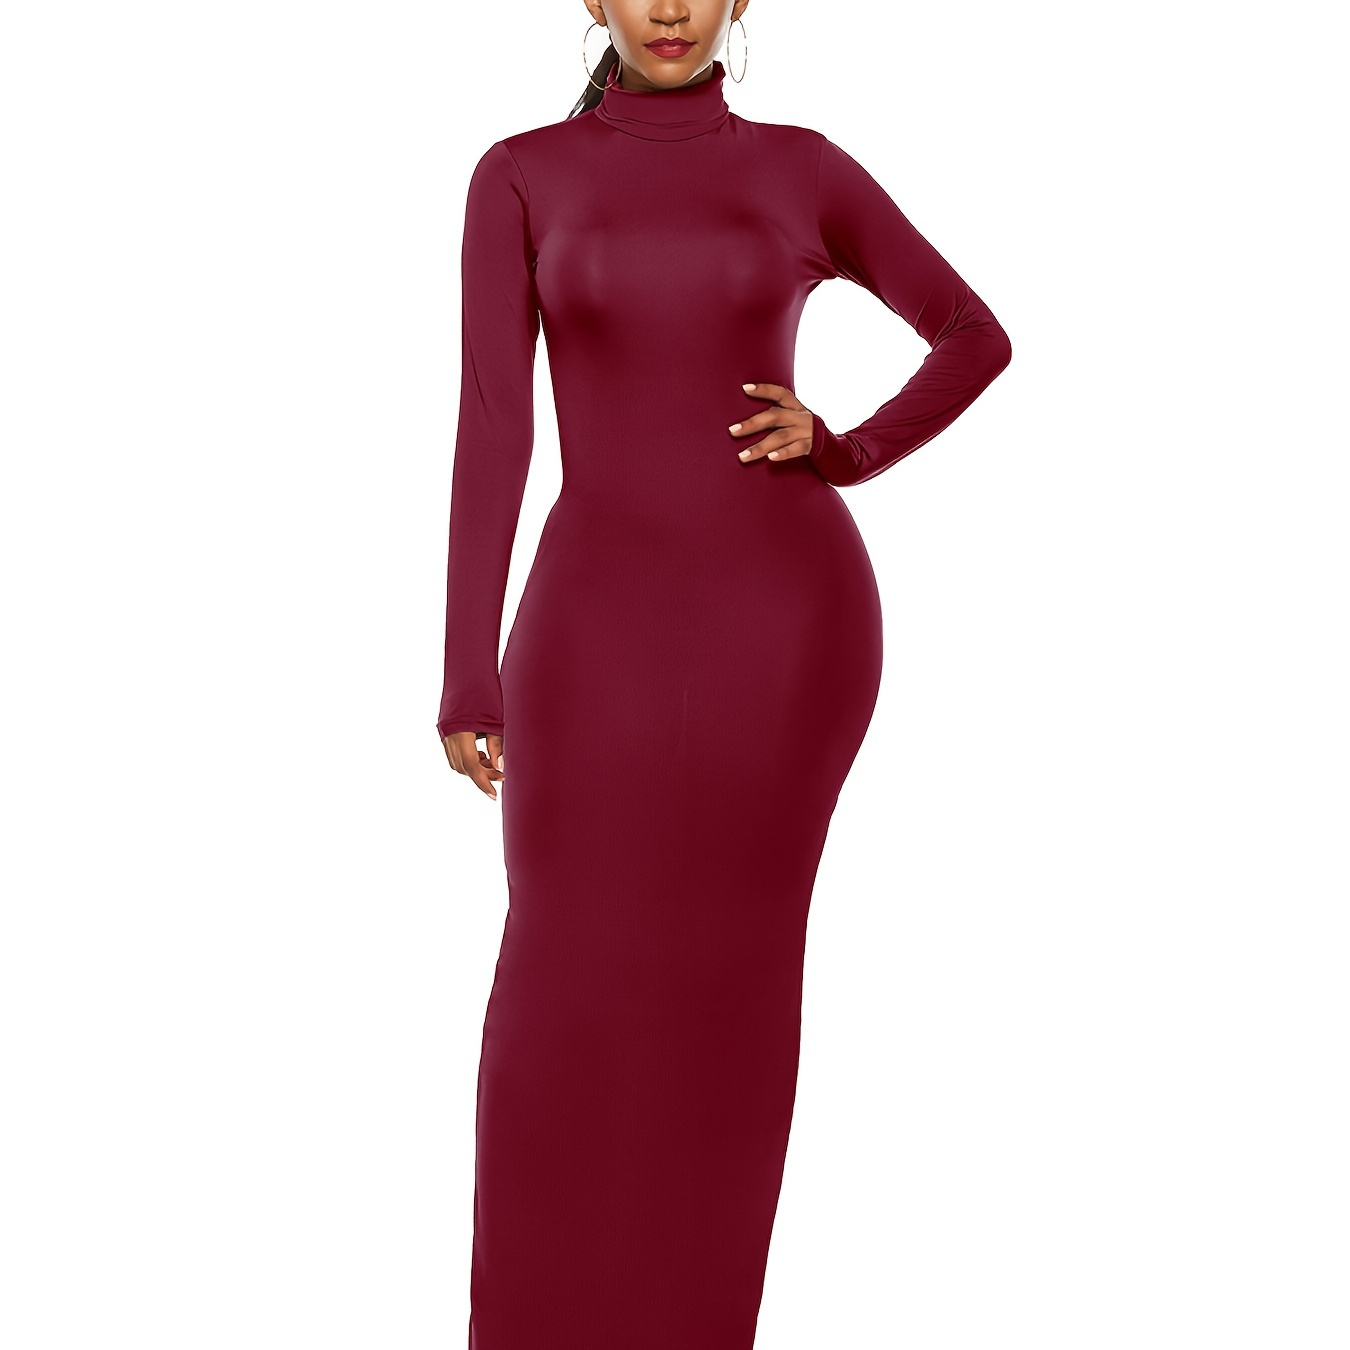 Solid Dacron And Spandex Maxi Dresses, Women's Turtleneck Long Sleeve ...